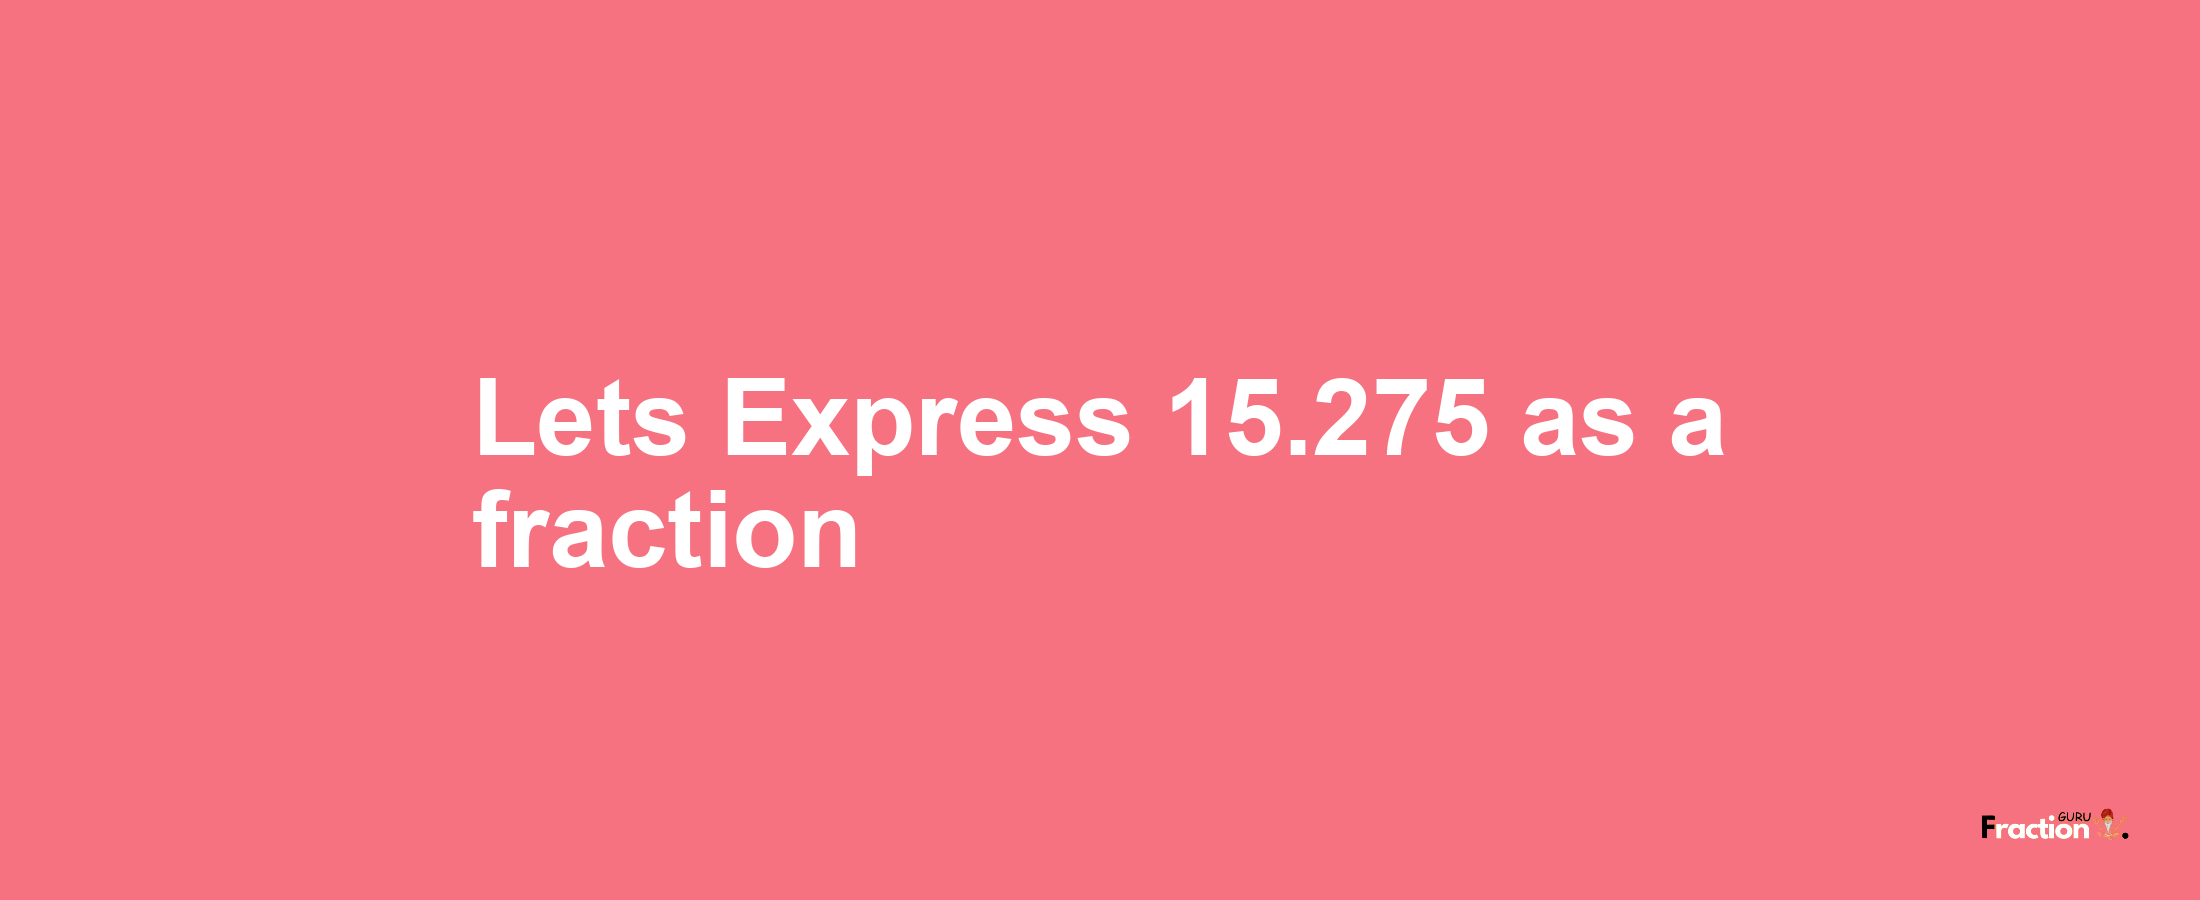 Lets Express 15.275 as afraction